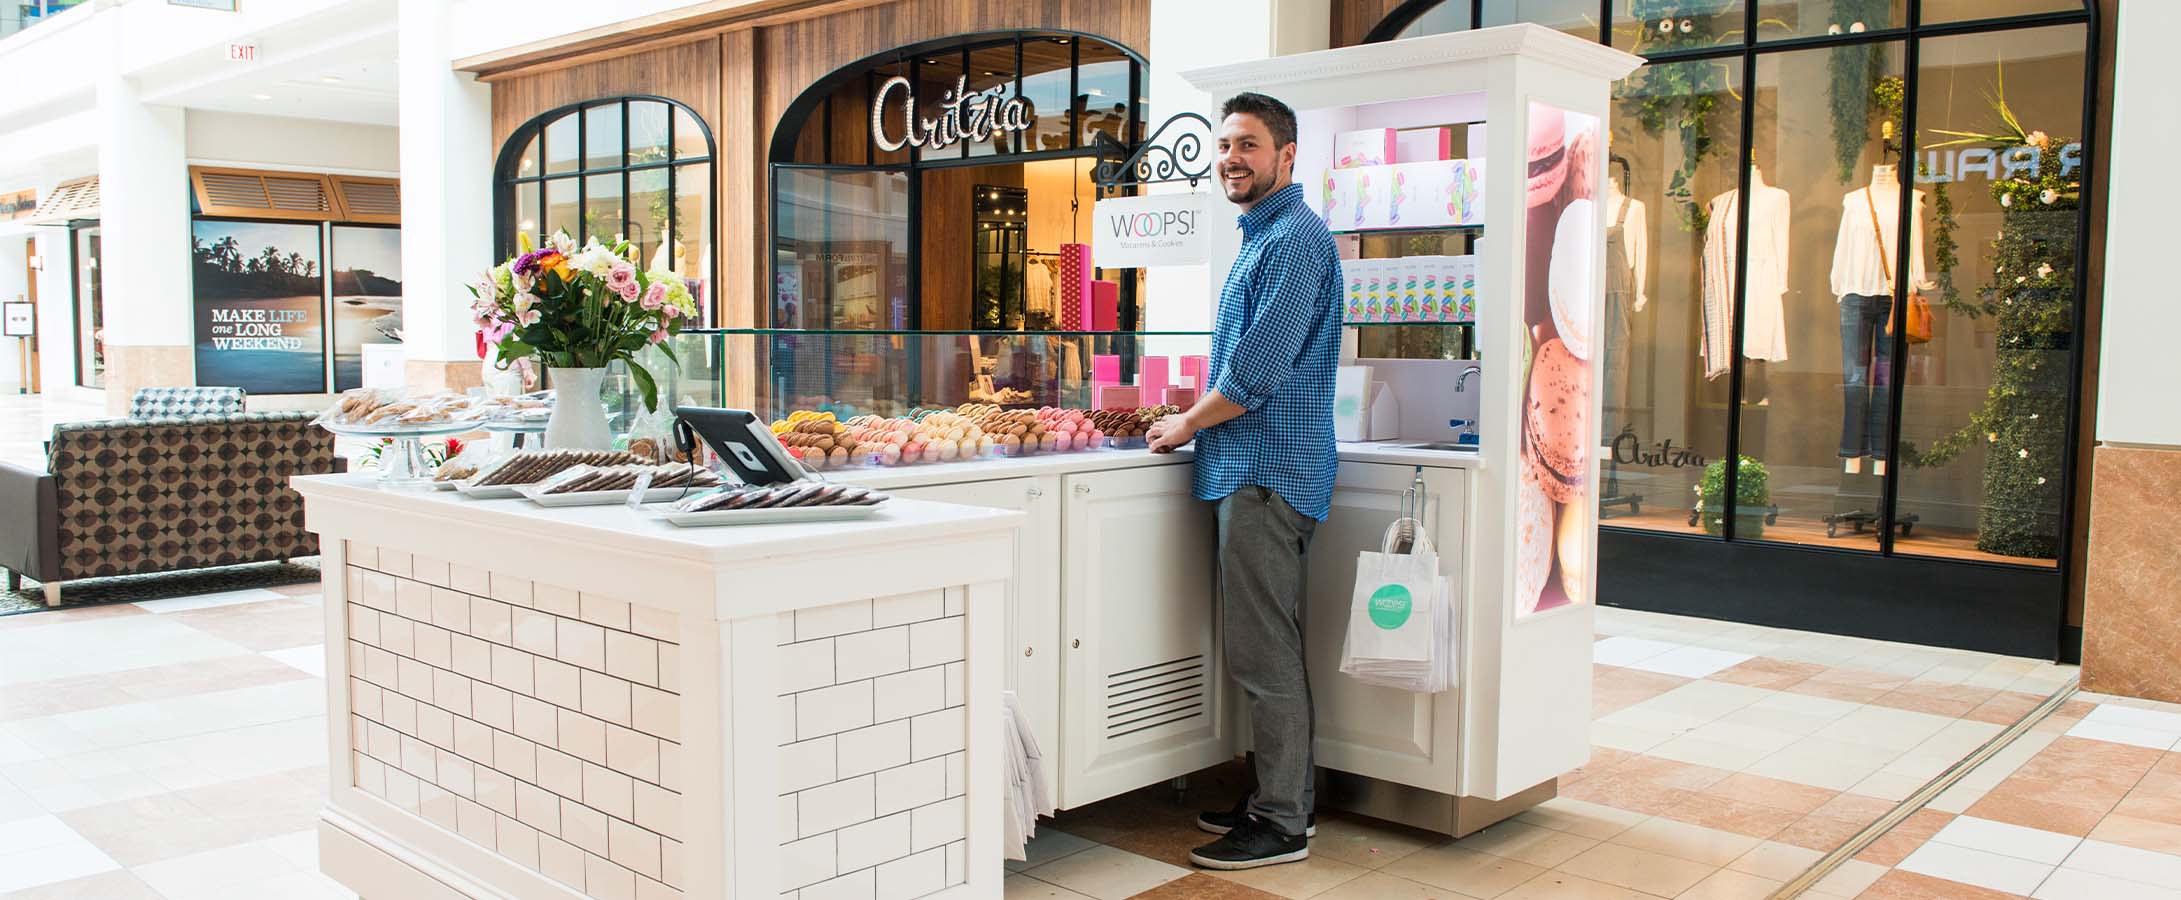 A smiling man is standing behind a Woops! kiosk counter that’s full of assorted French macarons and colorful macaron boxes.